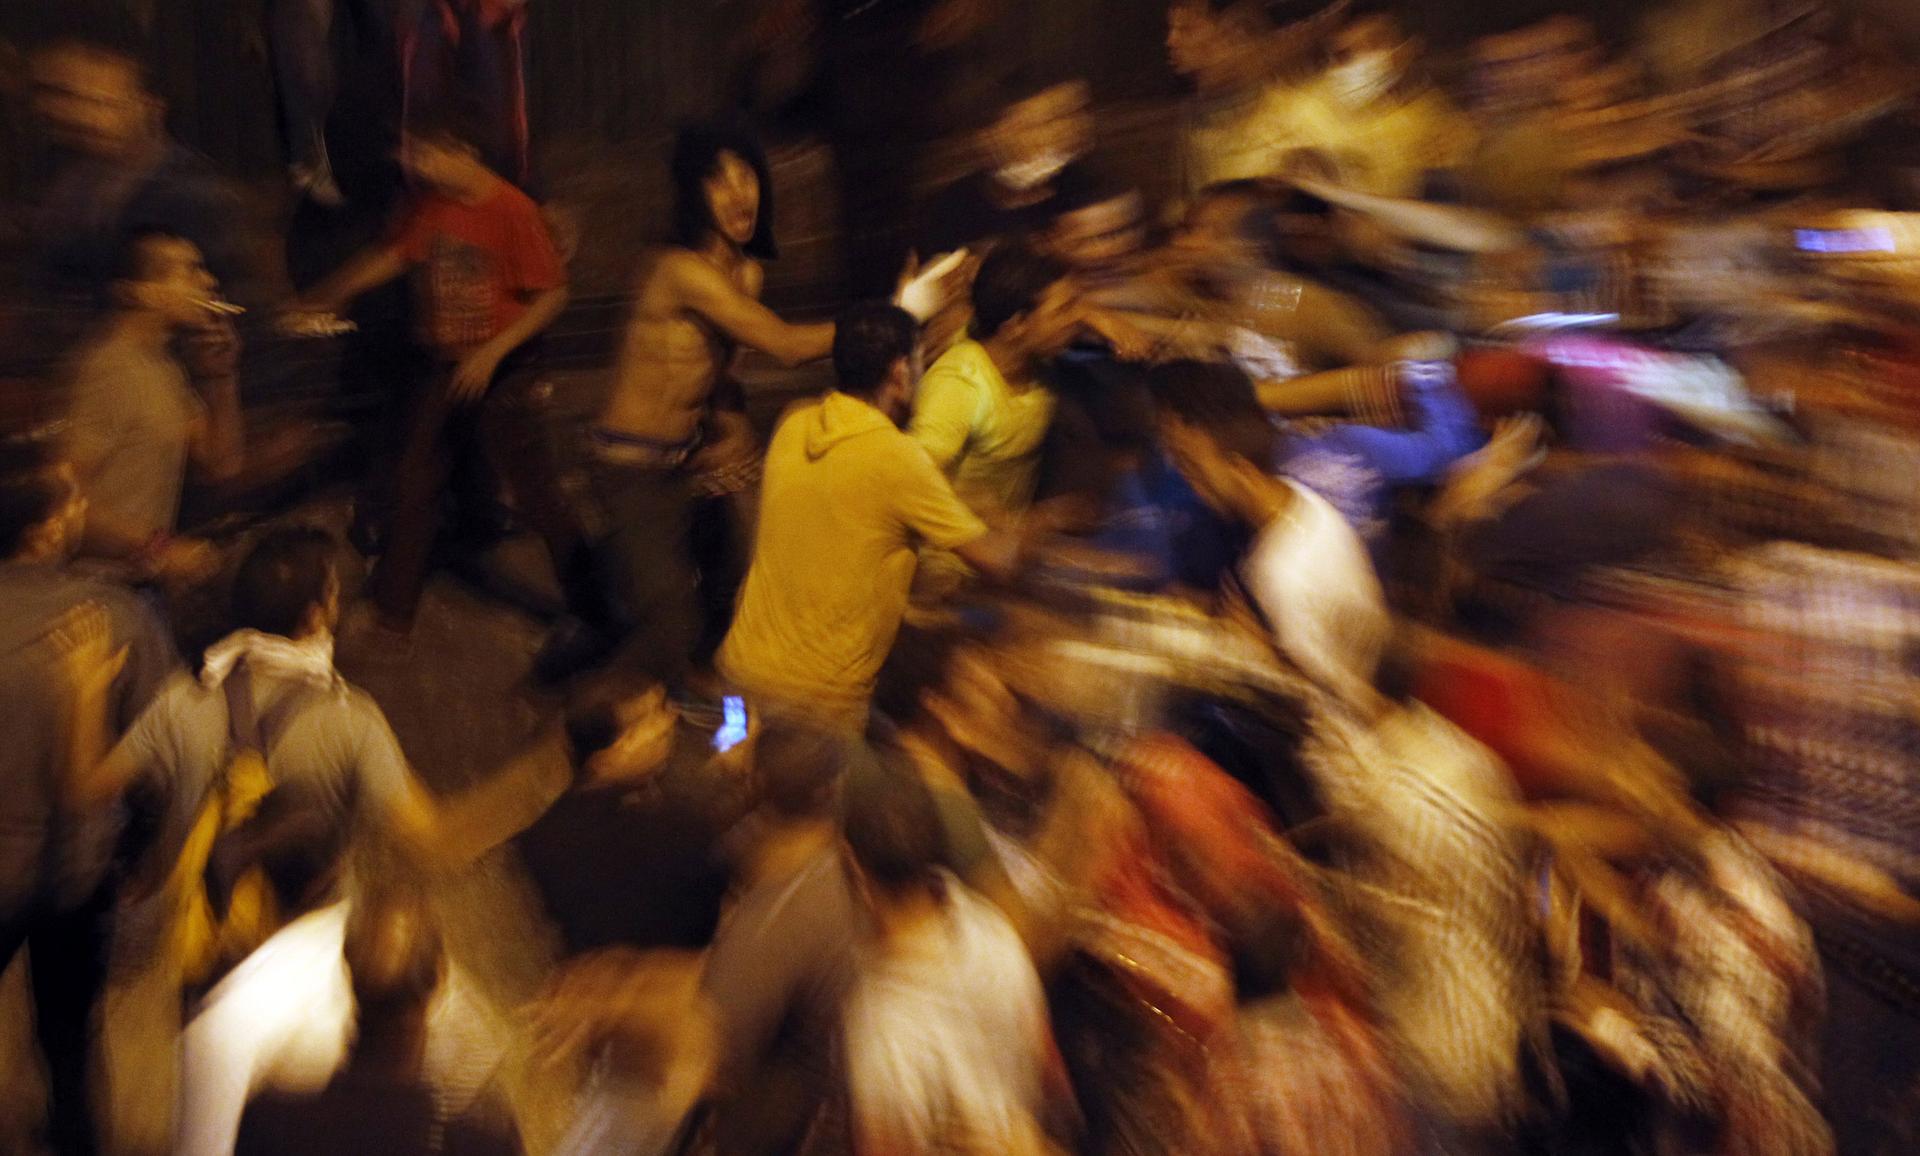 Anti-Mursi protesters clash with members of the Muslim Brotherhood near Tahrir Square on October 6, 2013.